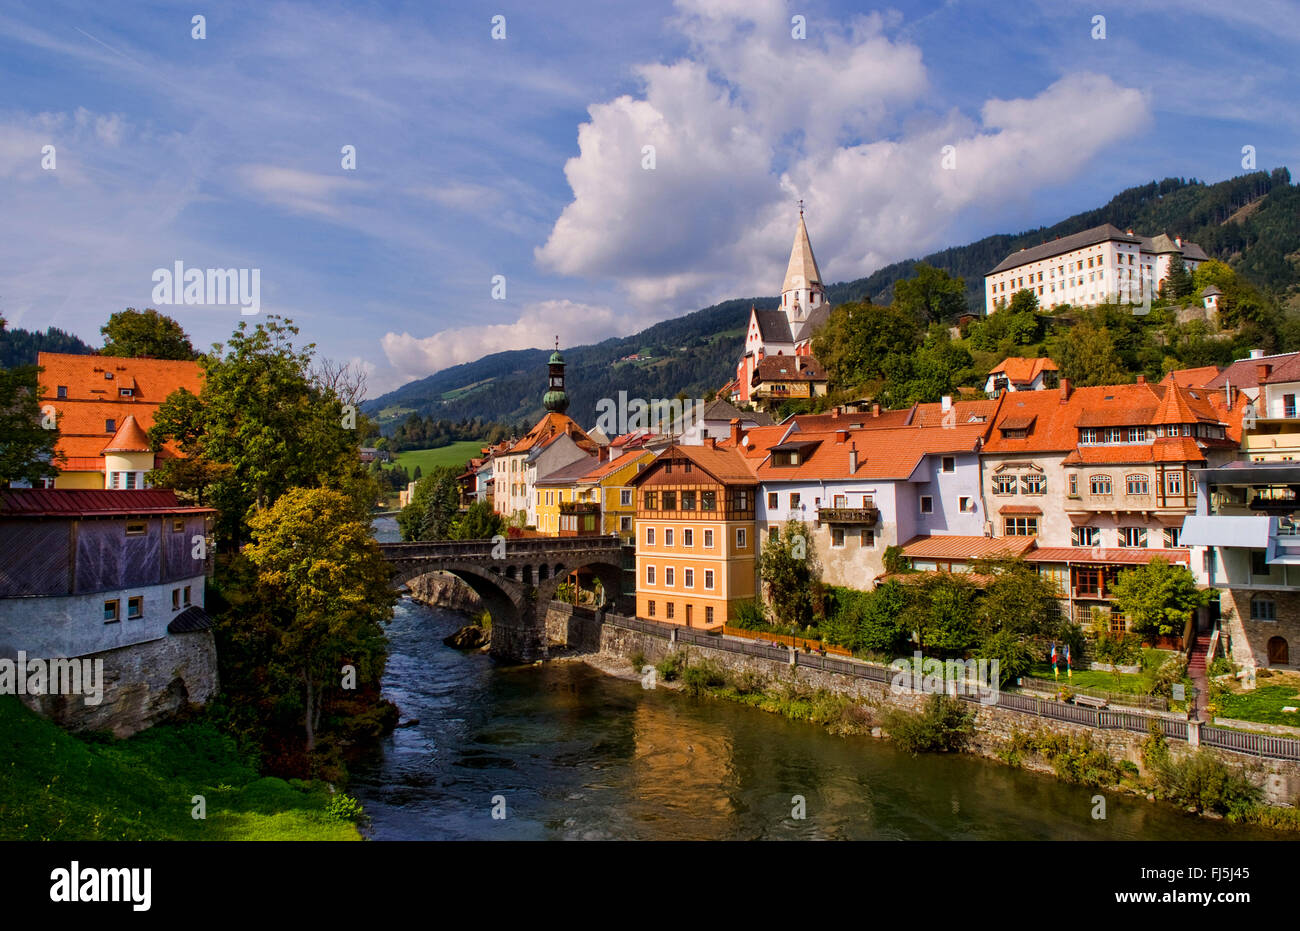 Old historical old town of Murau Austria downtown and churches and Mur River, Austria Stock Photo